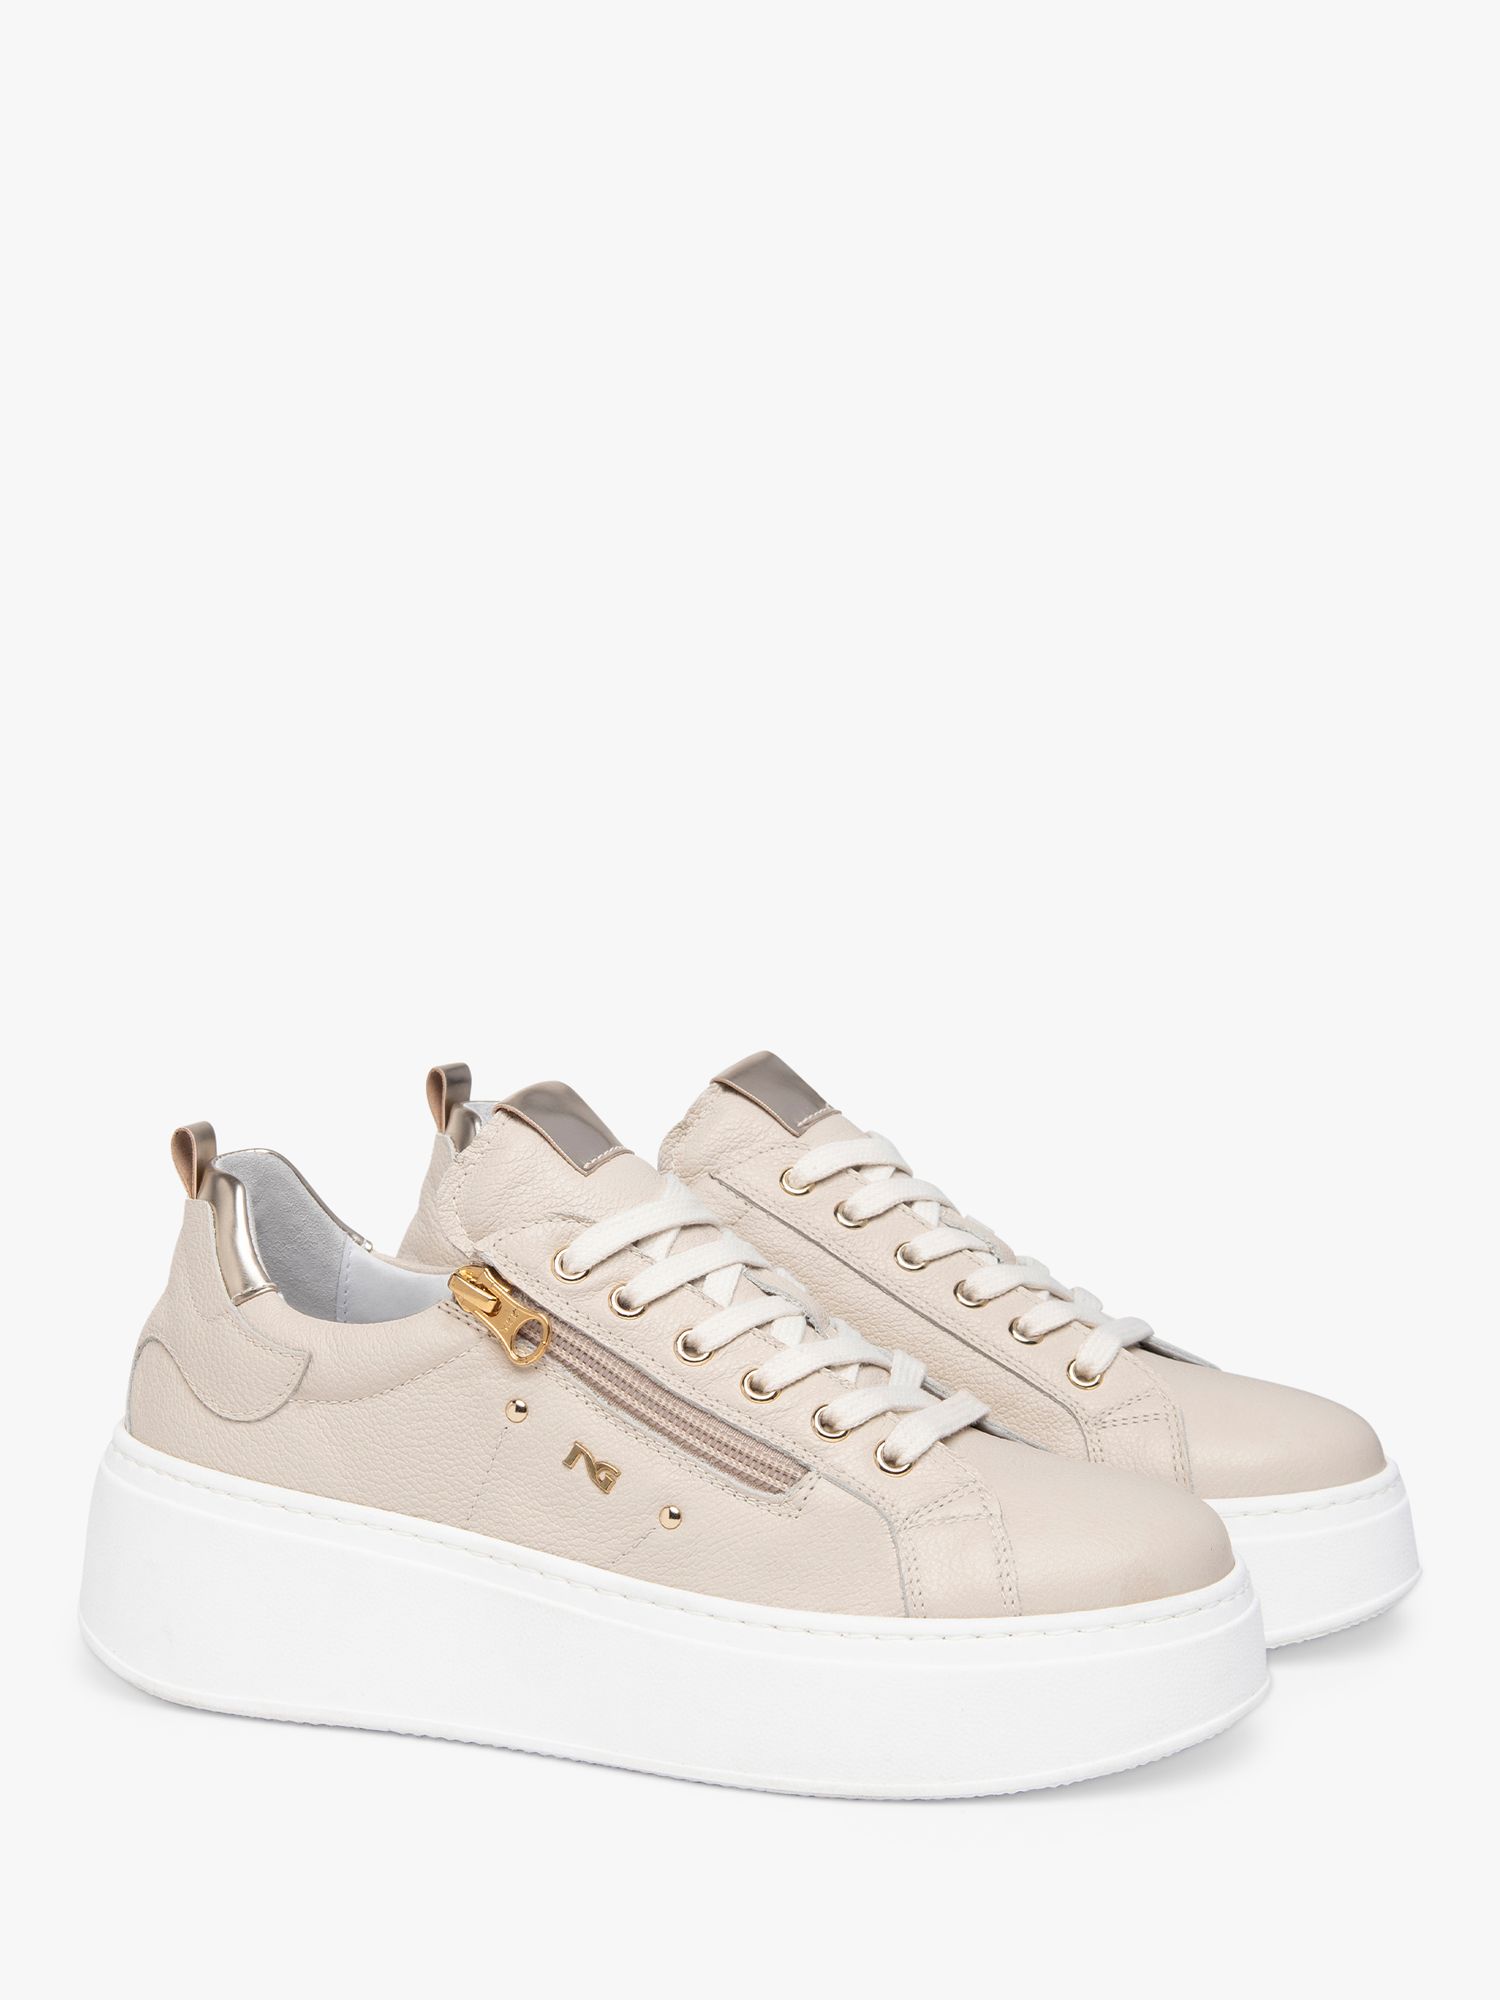 Buy NeroGiardini Chunky Leather Trainers Online at johnlewis.com